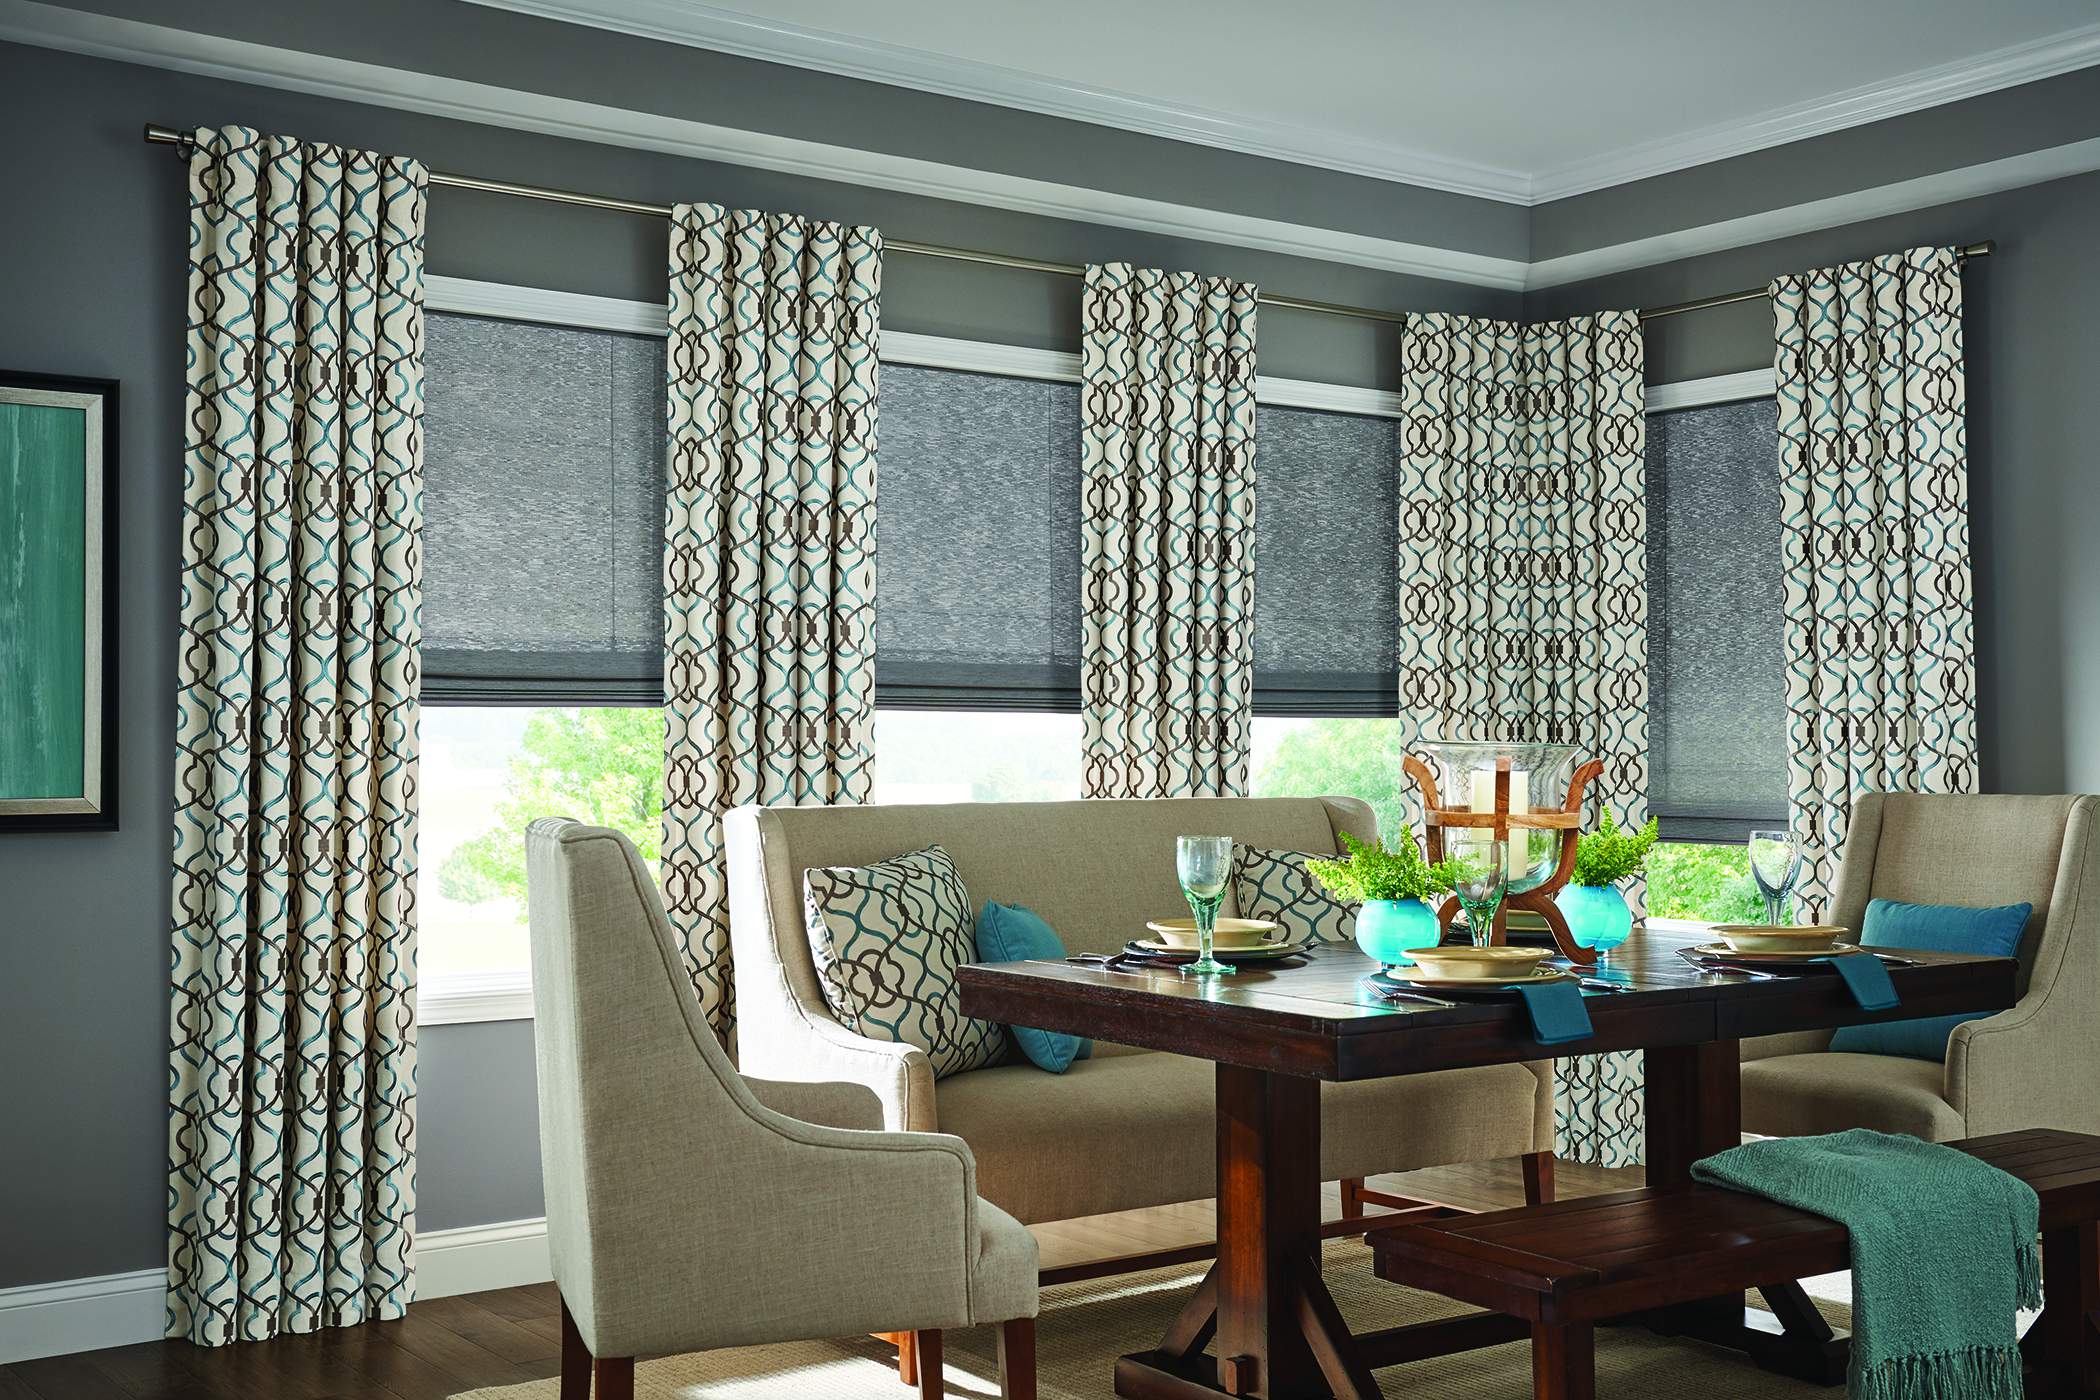 Old style roman shades with back tab panels